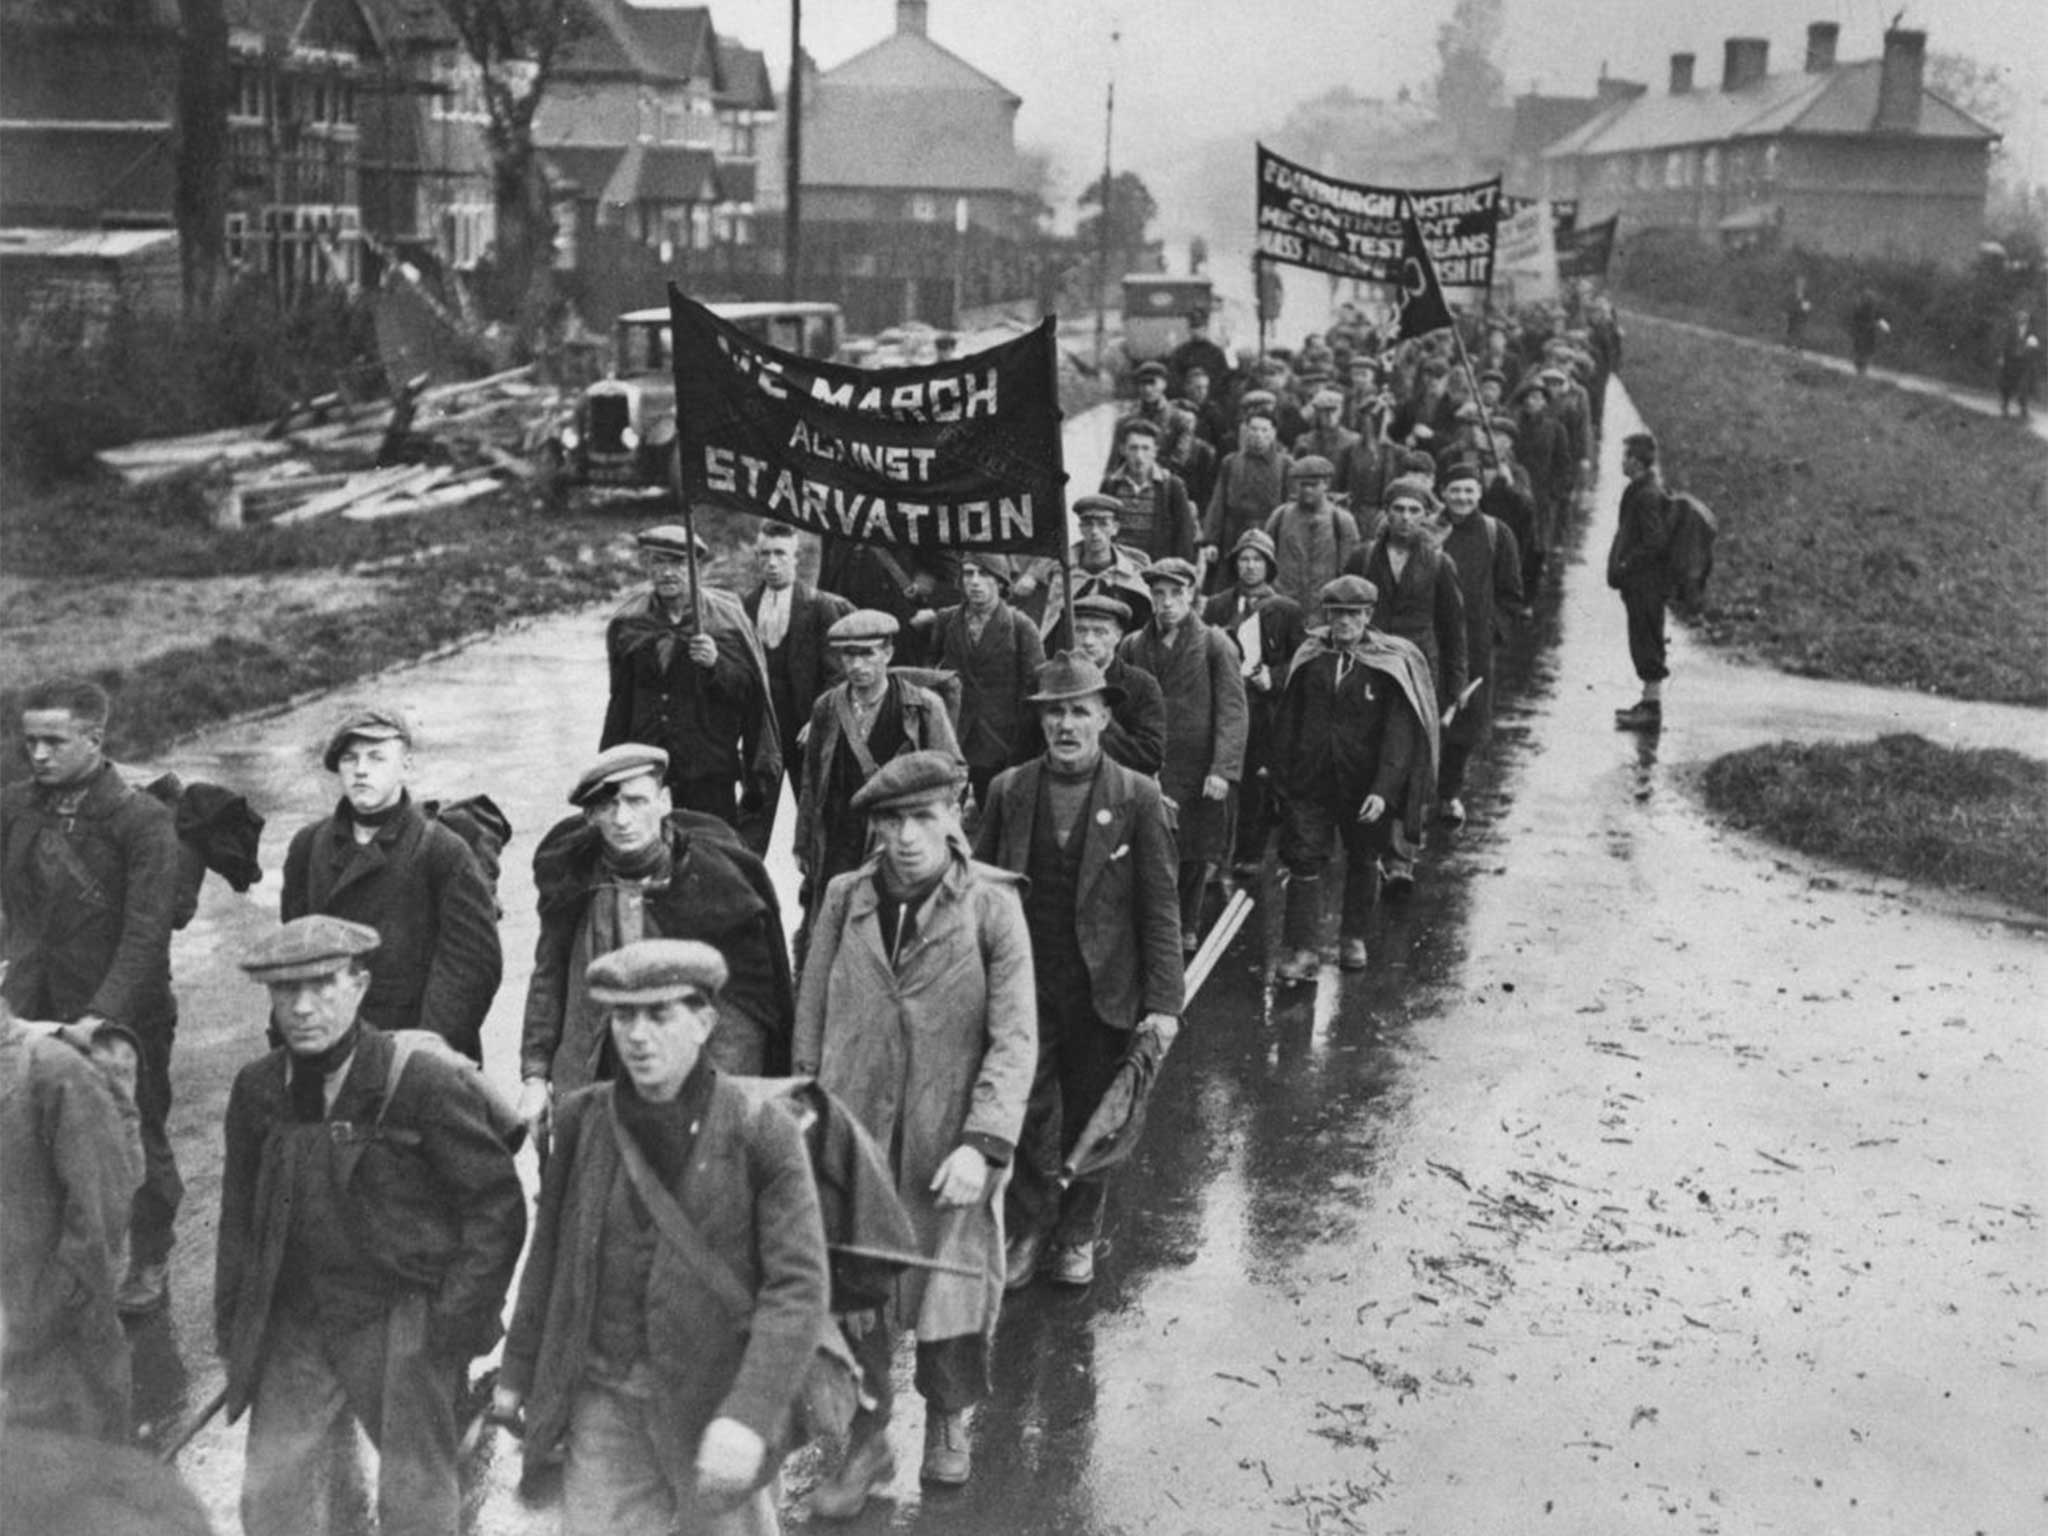 One of Britain’s earlier financial crises: a march by the umemployed in the 1930s